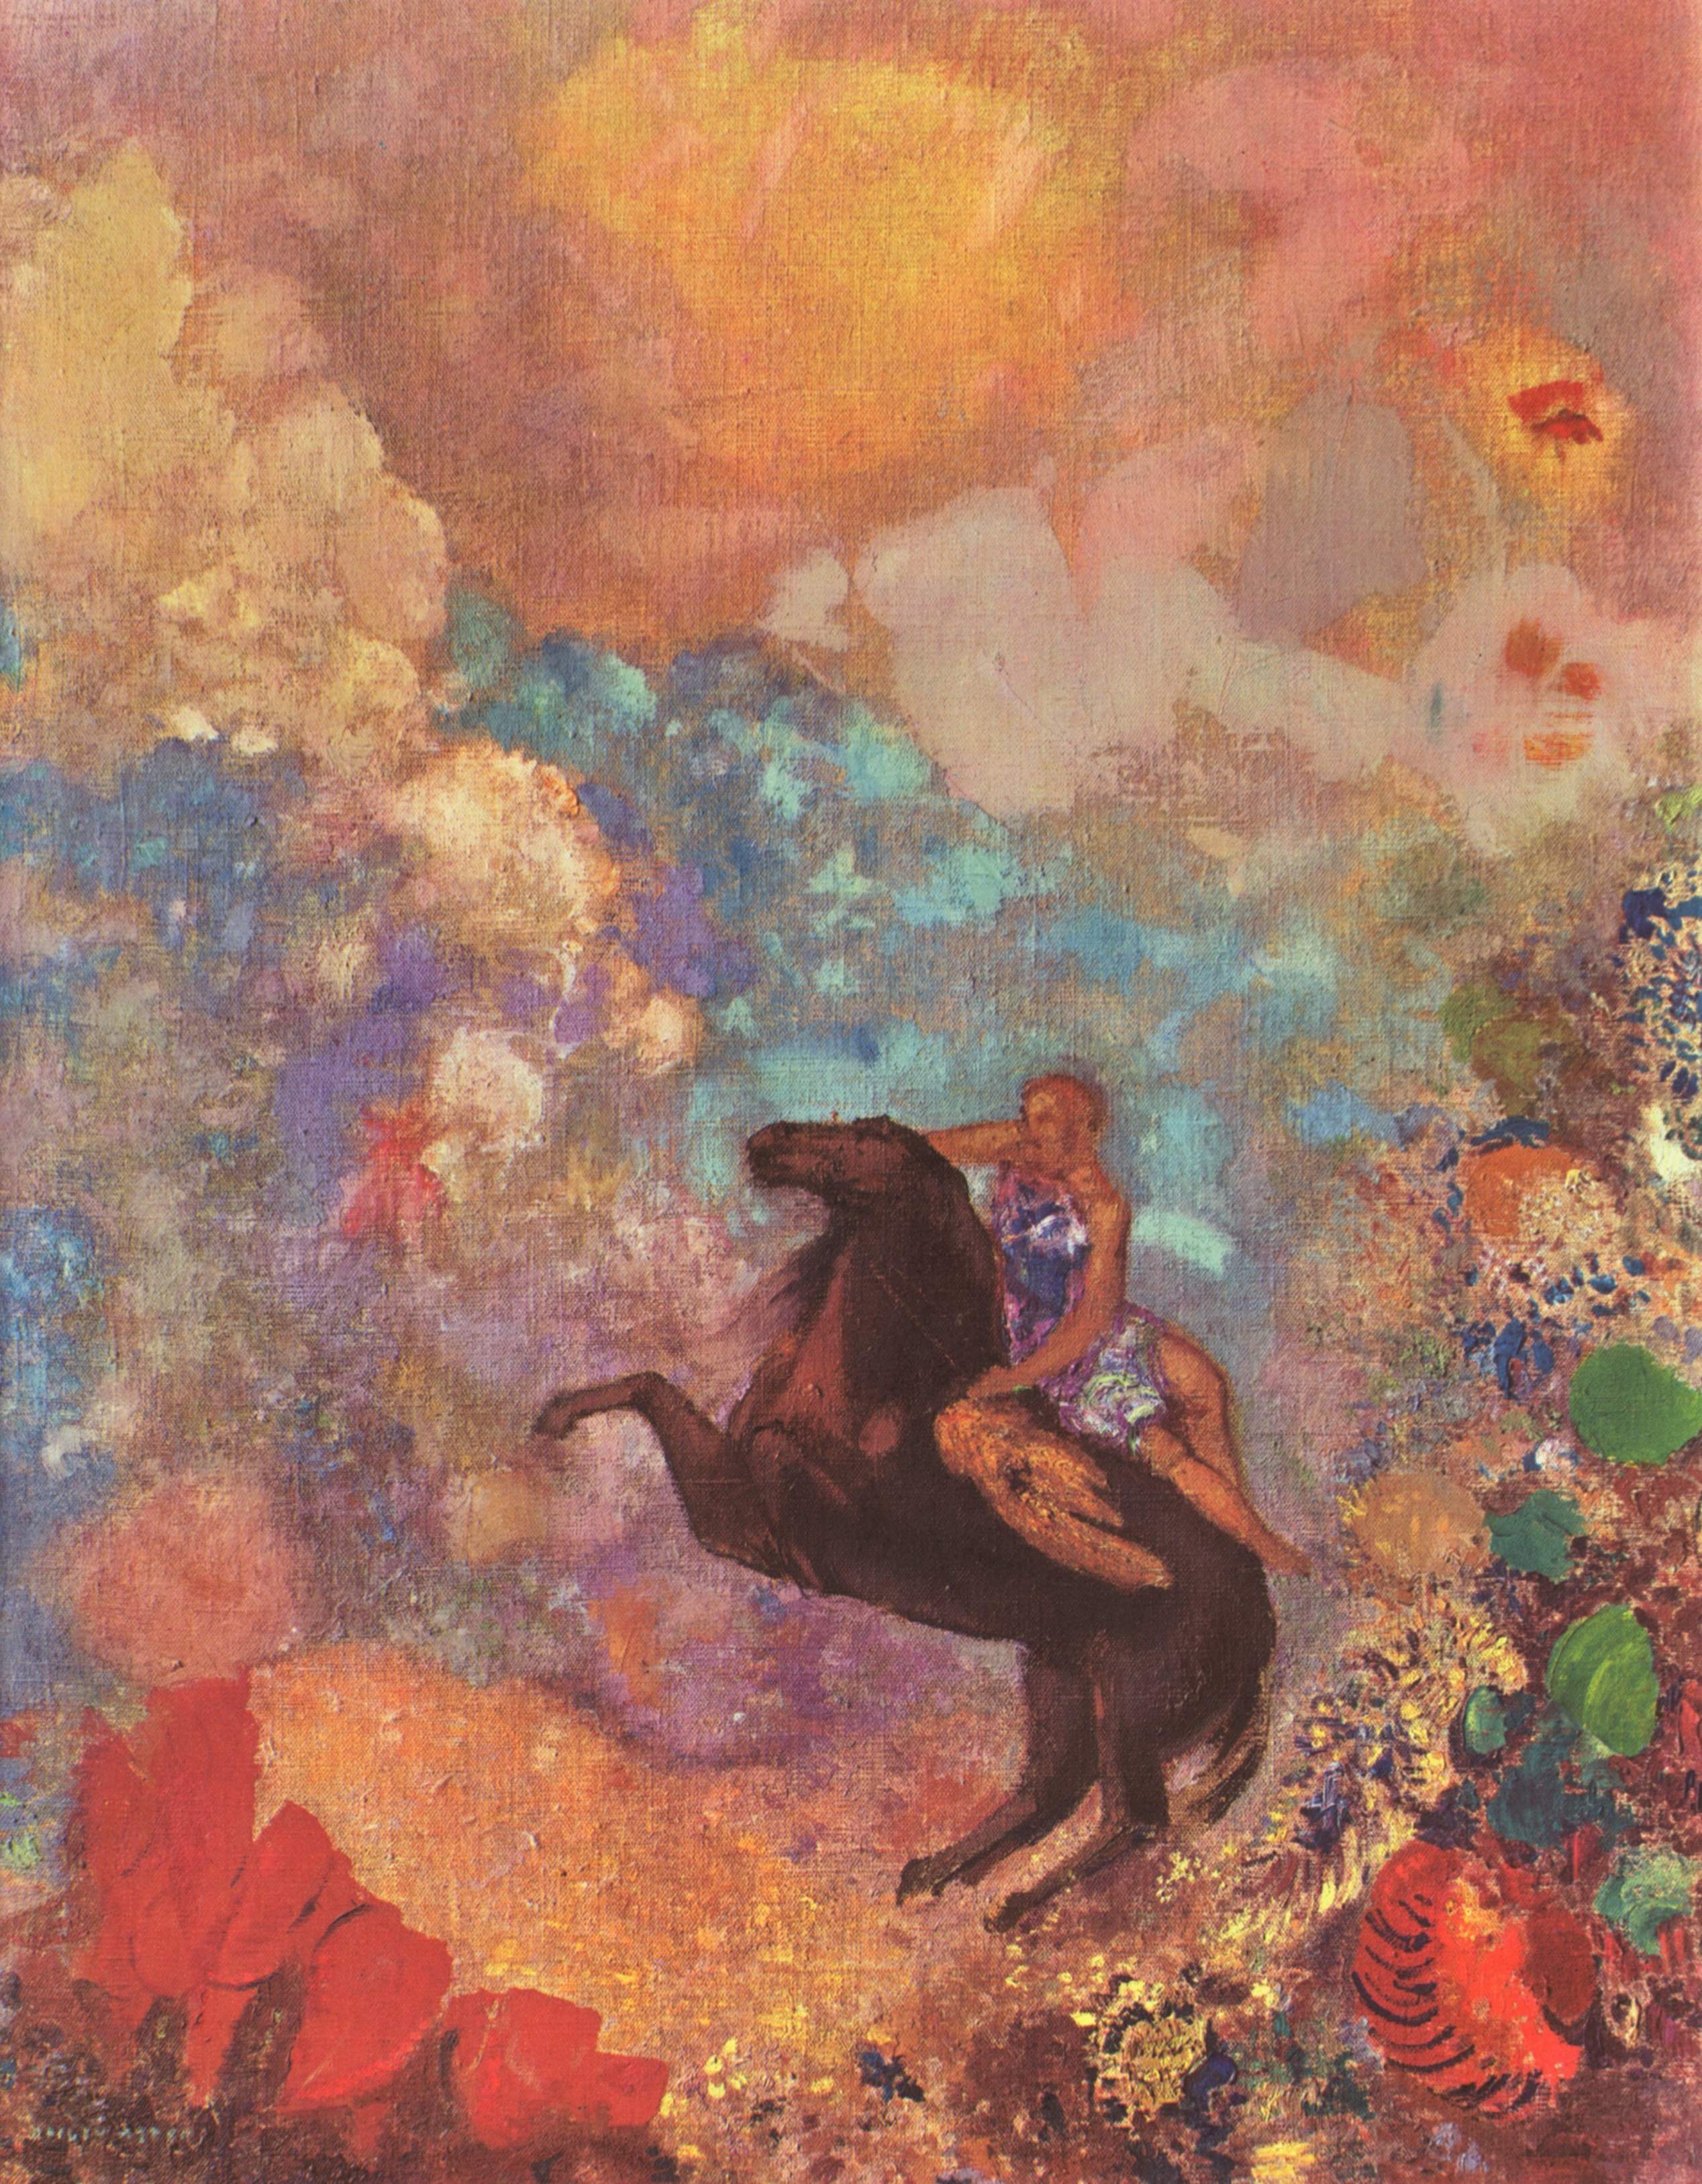 Muse on Pegasus by Odilon Redon - c. 1900 - 73 × 54 cm private collection